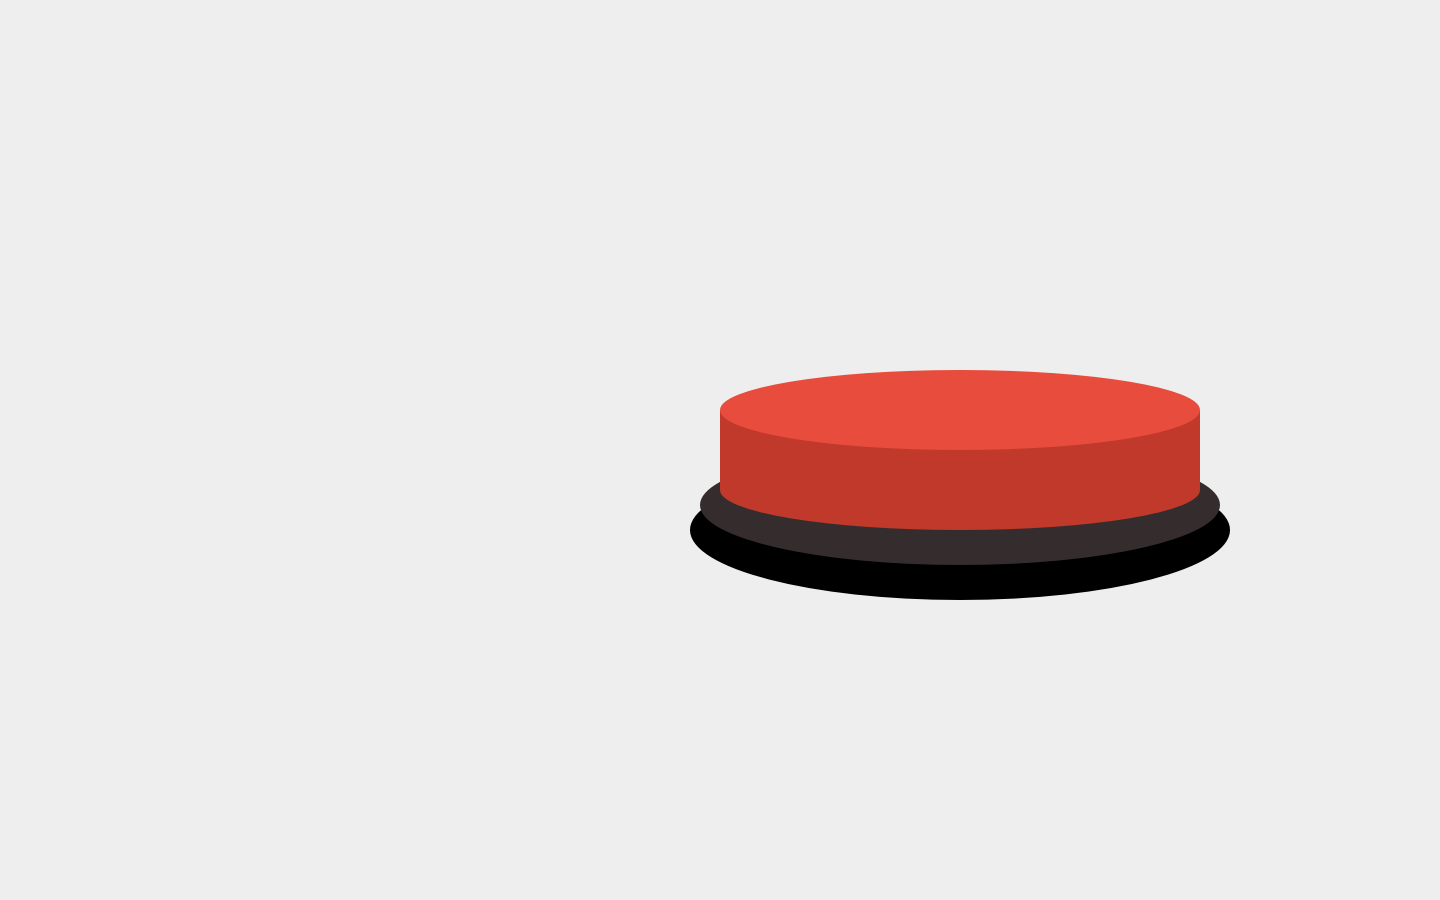 Big Red Button Codepad